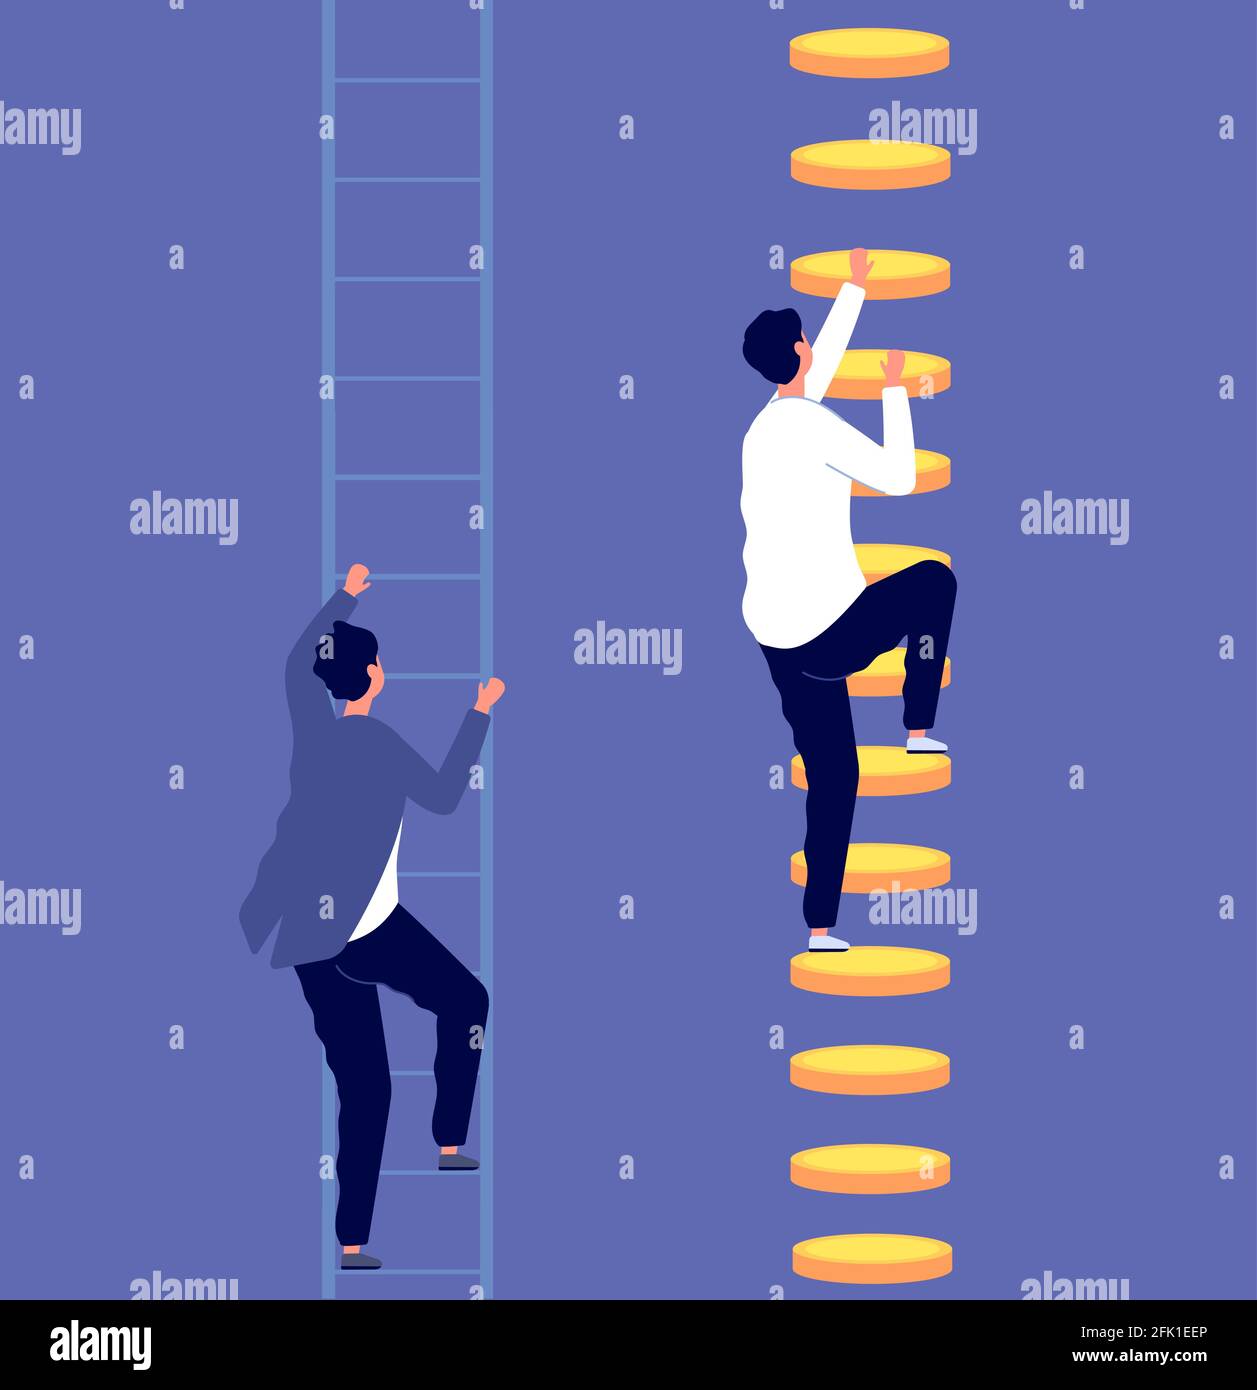 Career inequality. Social gap, employee discrimination. Tiny business professionals on ladders. Money help promotion vector illustration Stock Vector